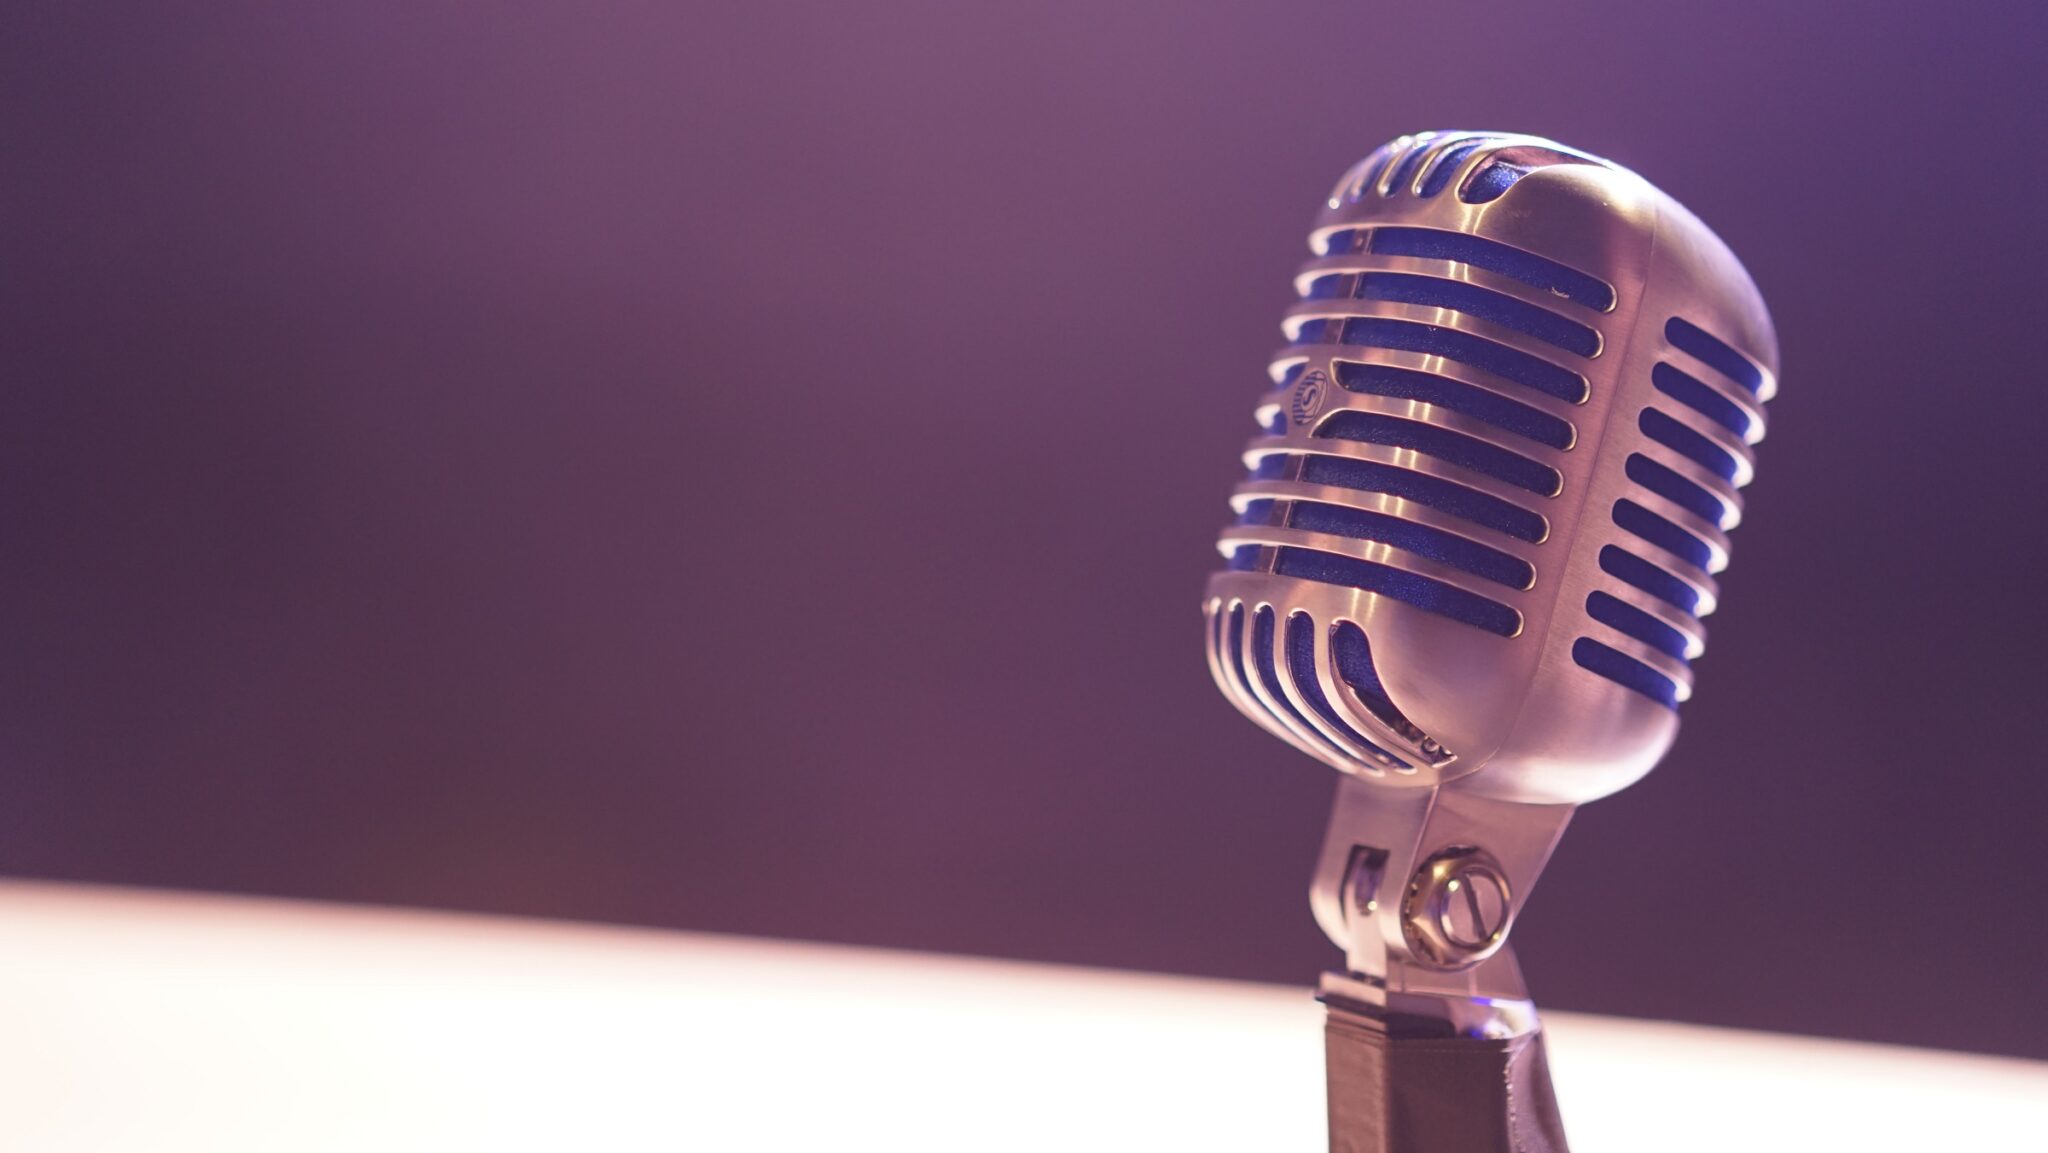 Microphone against a purple background for the Rise blog